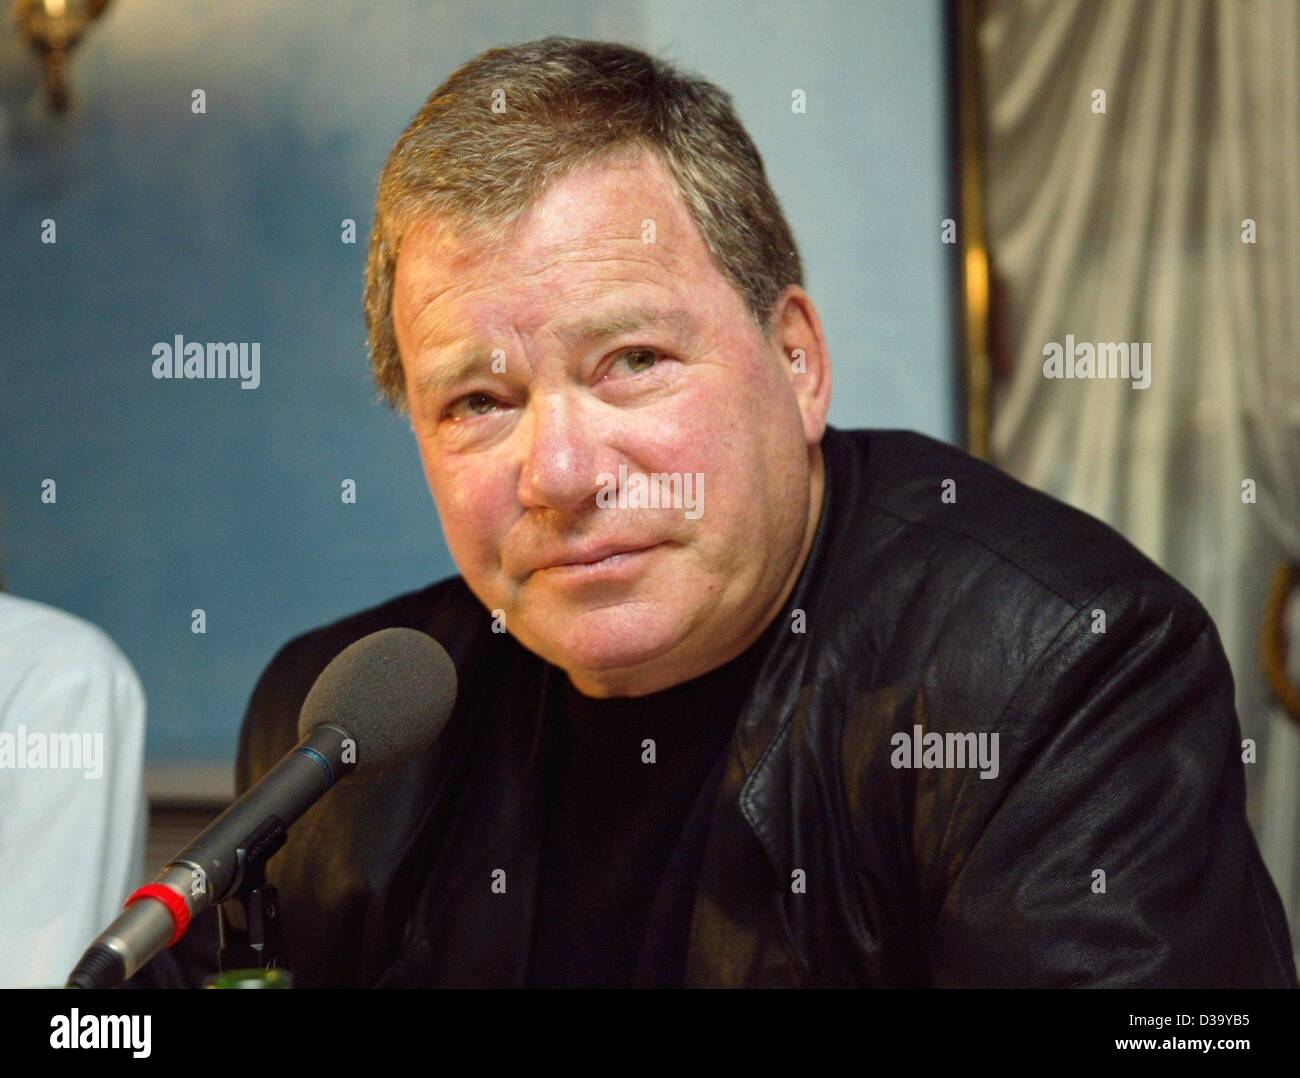 (dpa) - US actor William Shatner during a press conference in Munich, 1.3.2002. She received a film award by German private tv channel 'Kabel 1' at a gala later that evening. Shatner's tv classic 'Star Trek' was honored as 'Most successful tv serial'. Stock Photo